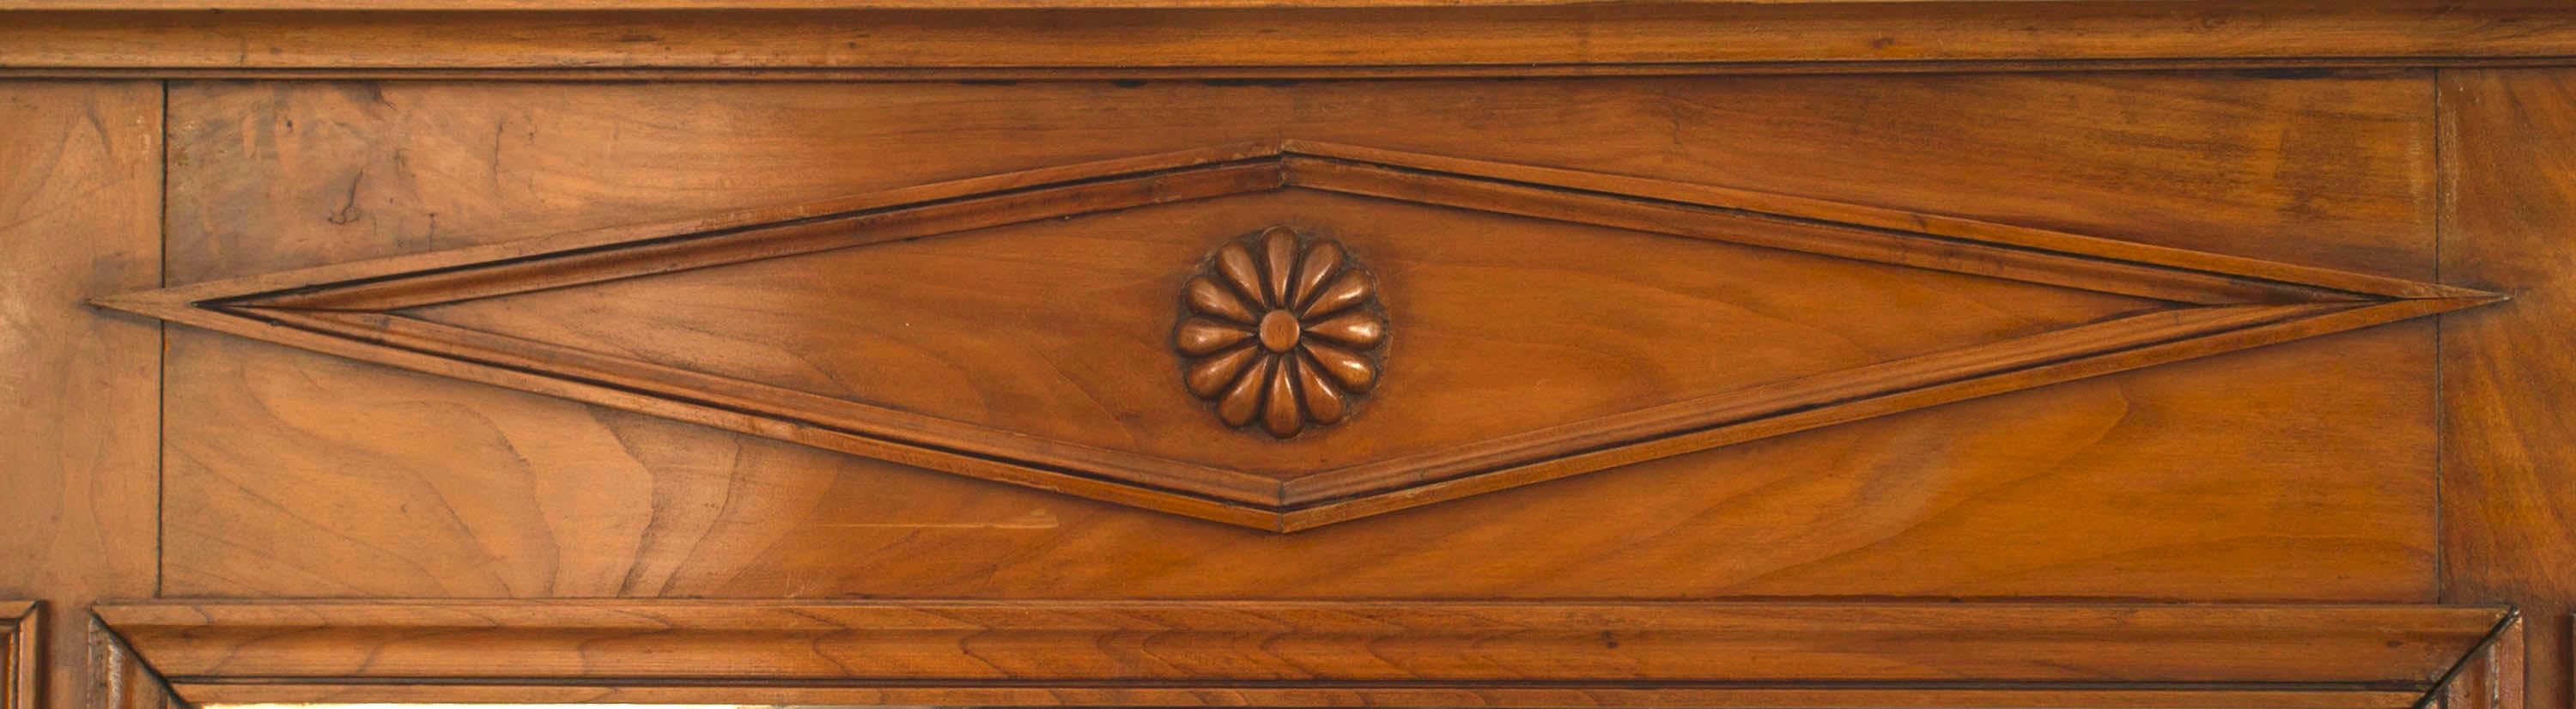 Austrian Biedermeier-style vertical fruitwood wall mirror with paneled sides and a diamond design motif on top.
